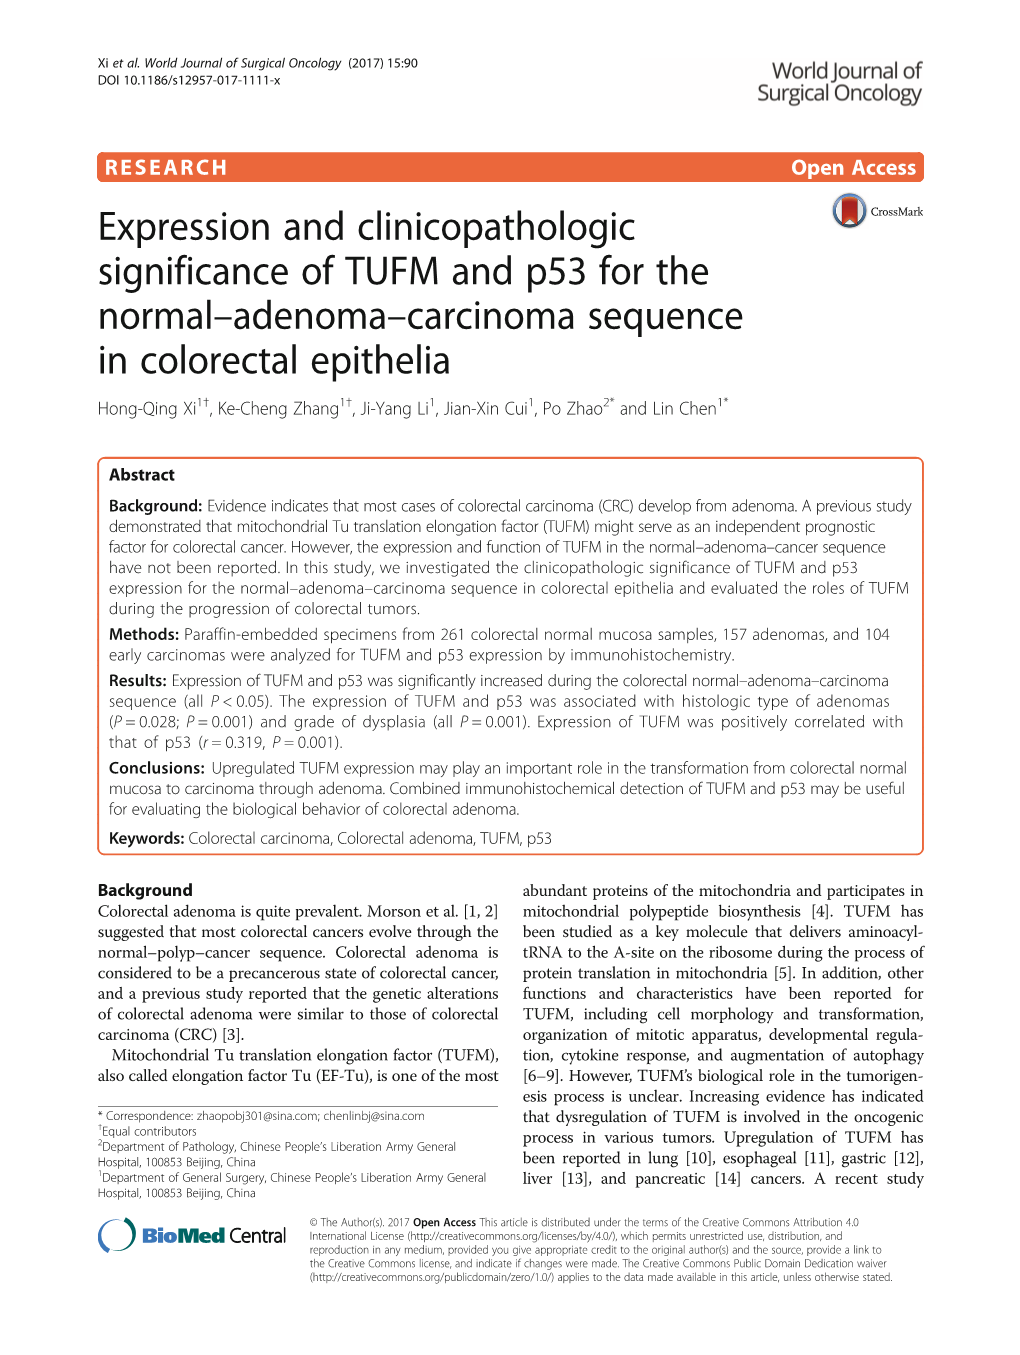 Expression and Clinicopathologic Significance of TUFM and P53 For